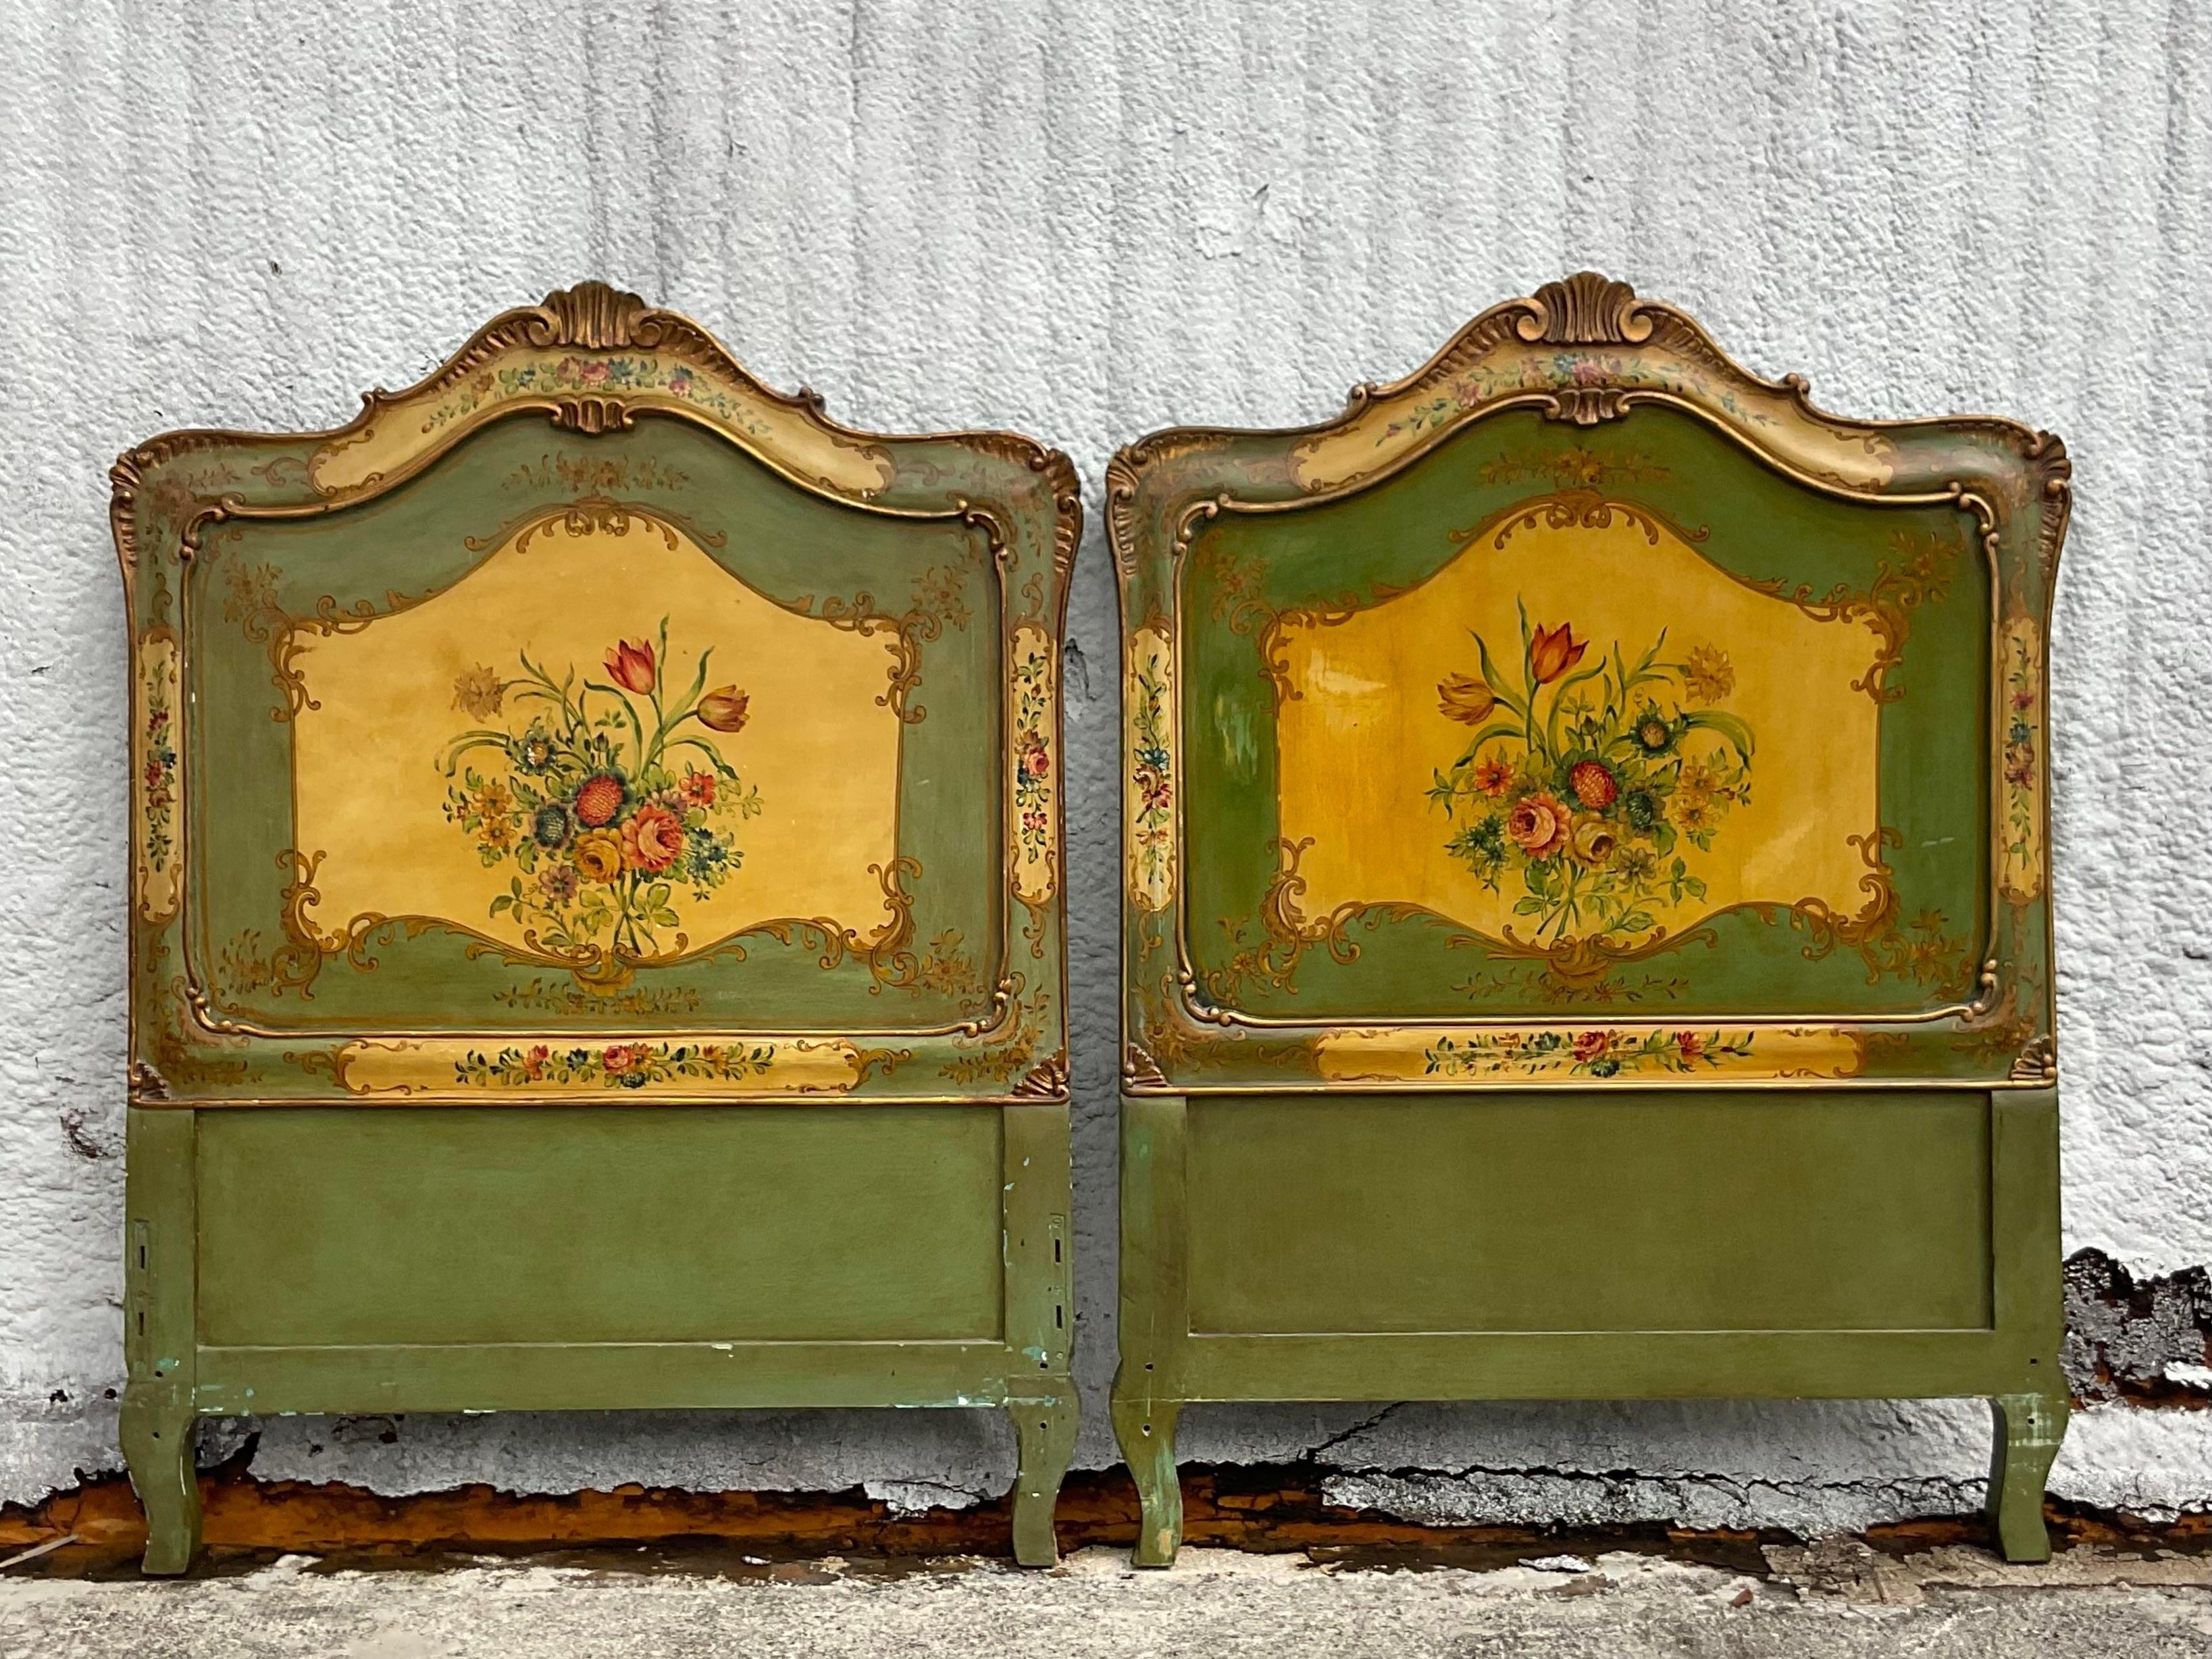 A fabulous pair of vintage Italian twin headboards. Beautiful carved detail with incredible hand painted flora design. A gorgeous all over patina from time. Acquired from a Palm Beach estate.